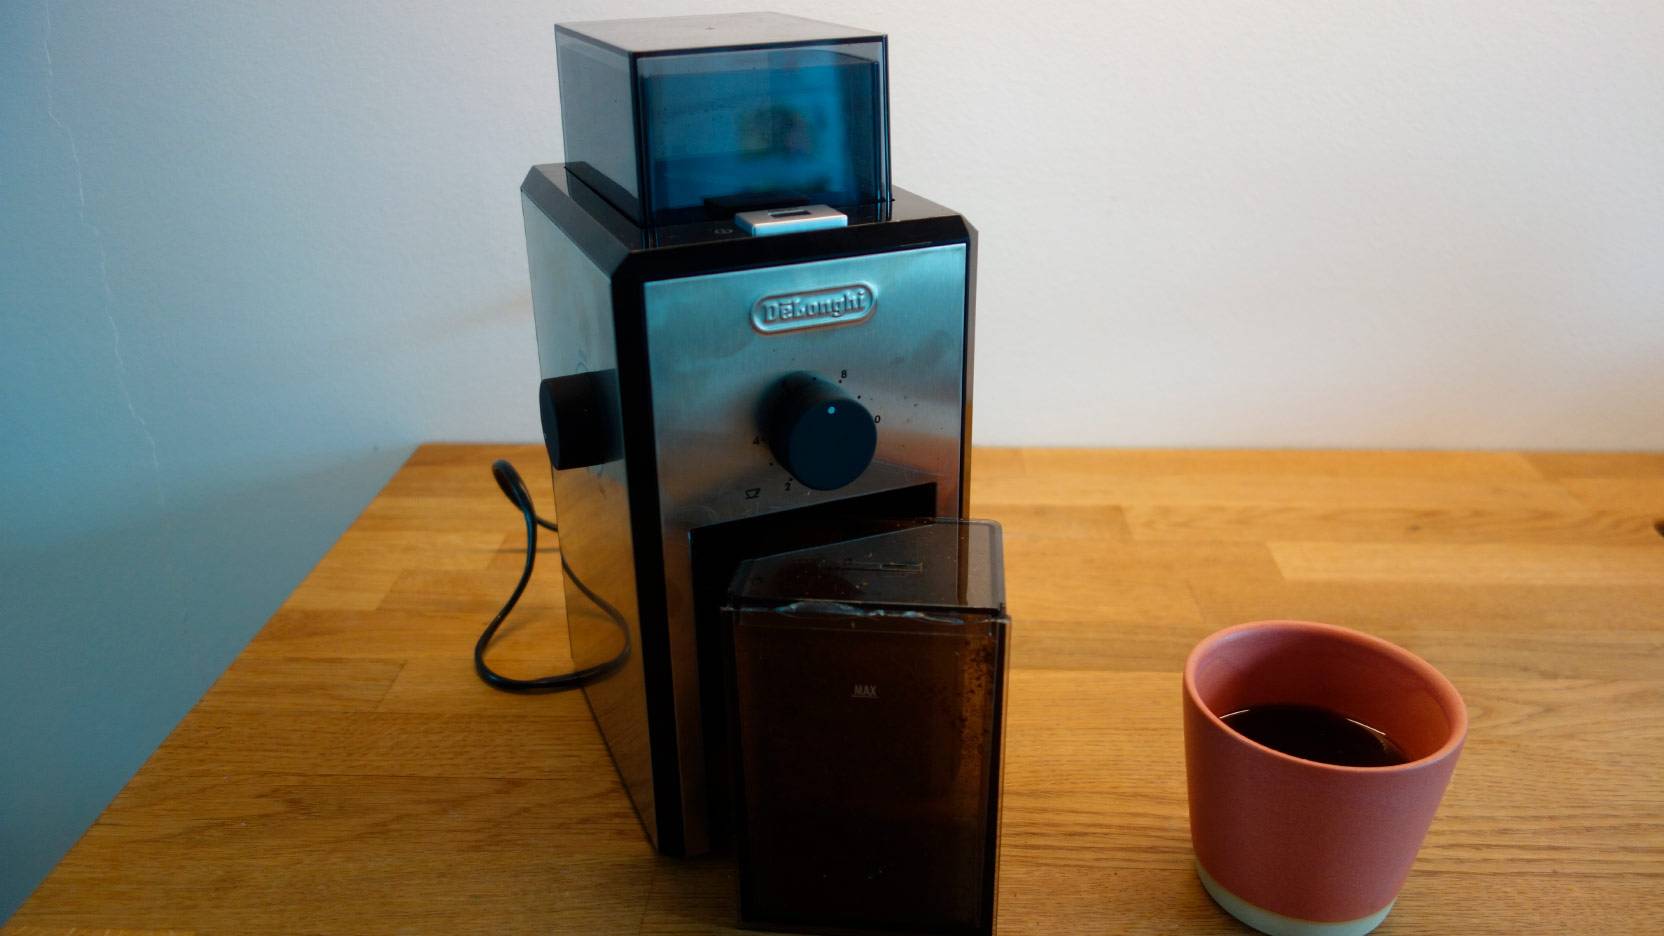 Image of Delonghi KG89 coffee grinder on the worktop with a pink cup of coffee